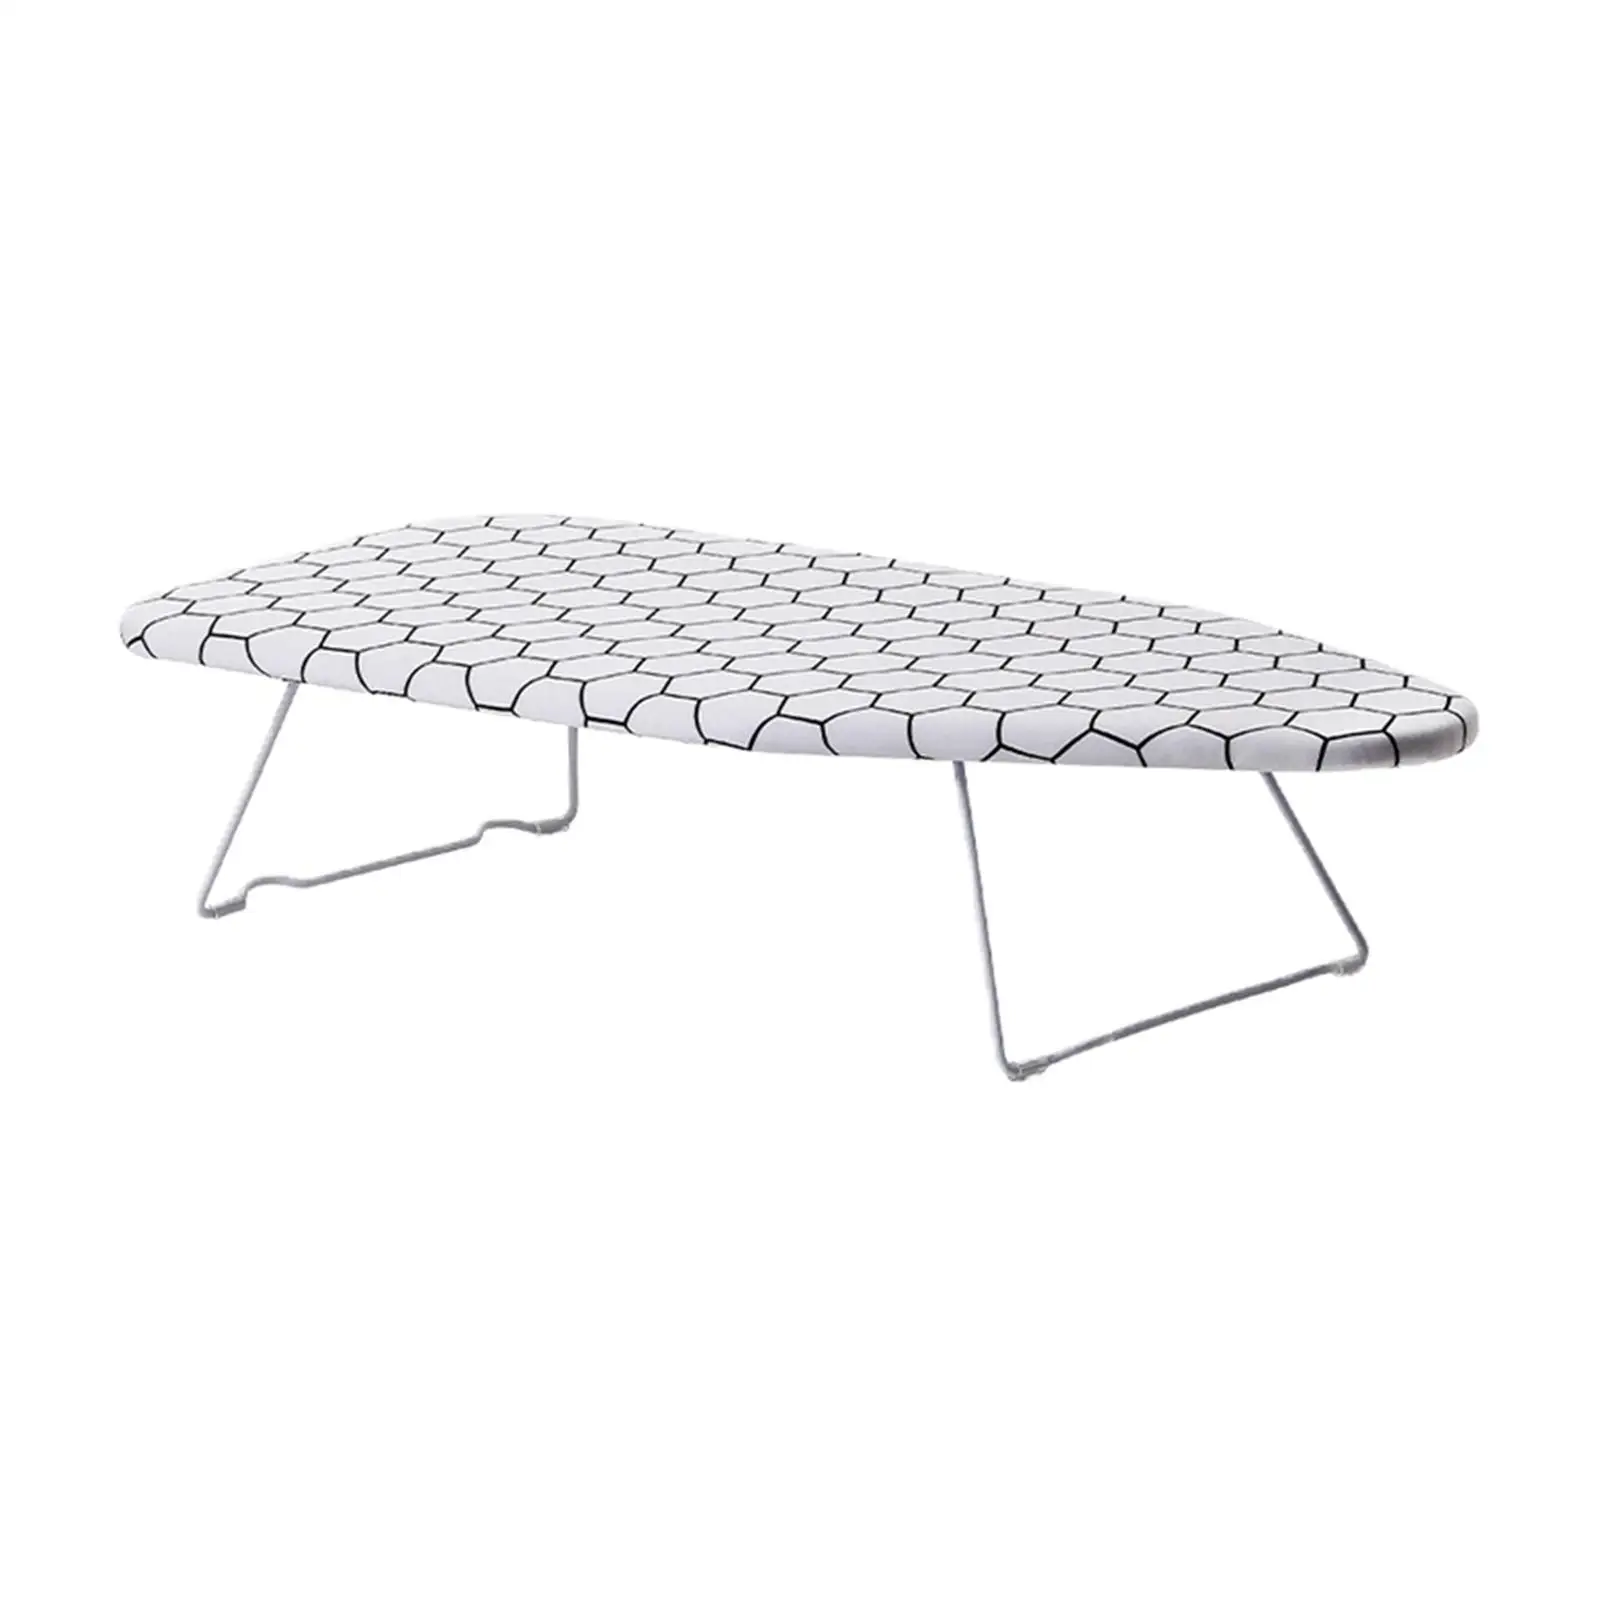 Portable Mini Ironing Board Heat Resistant Cover Small Iron Board Metal Base for Laundry Room Bedroom Home